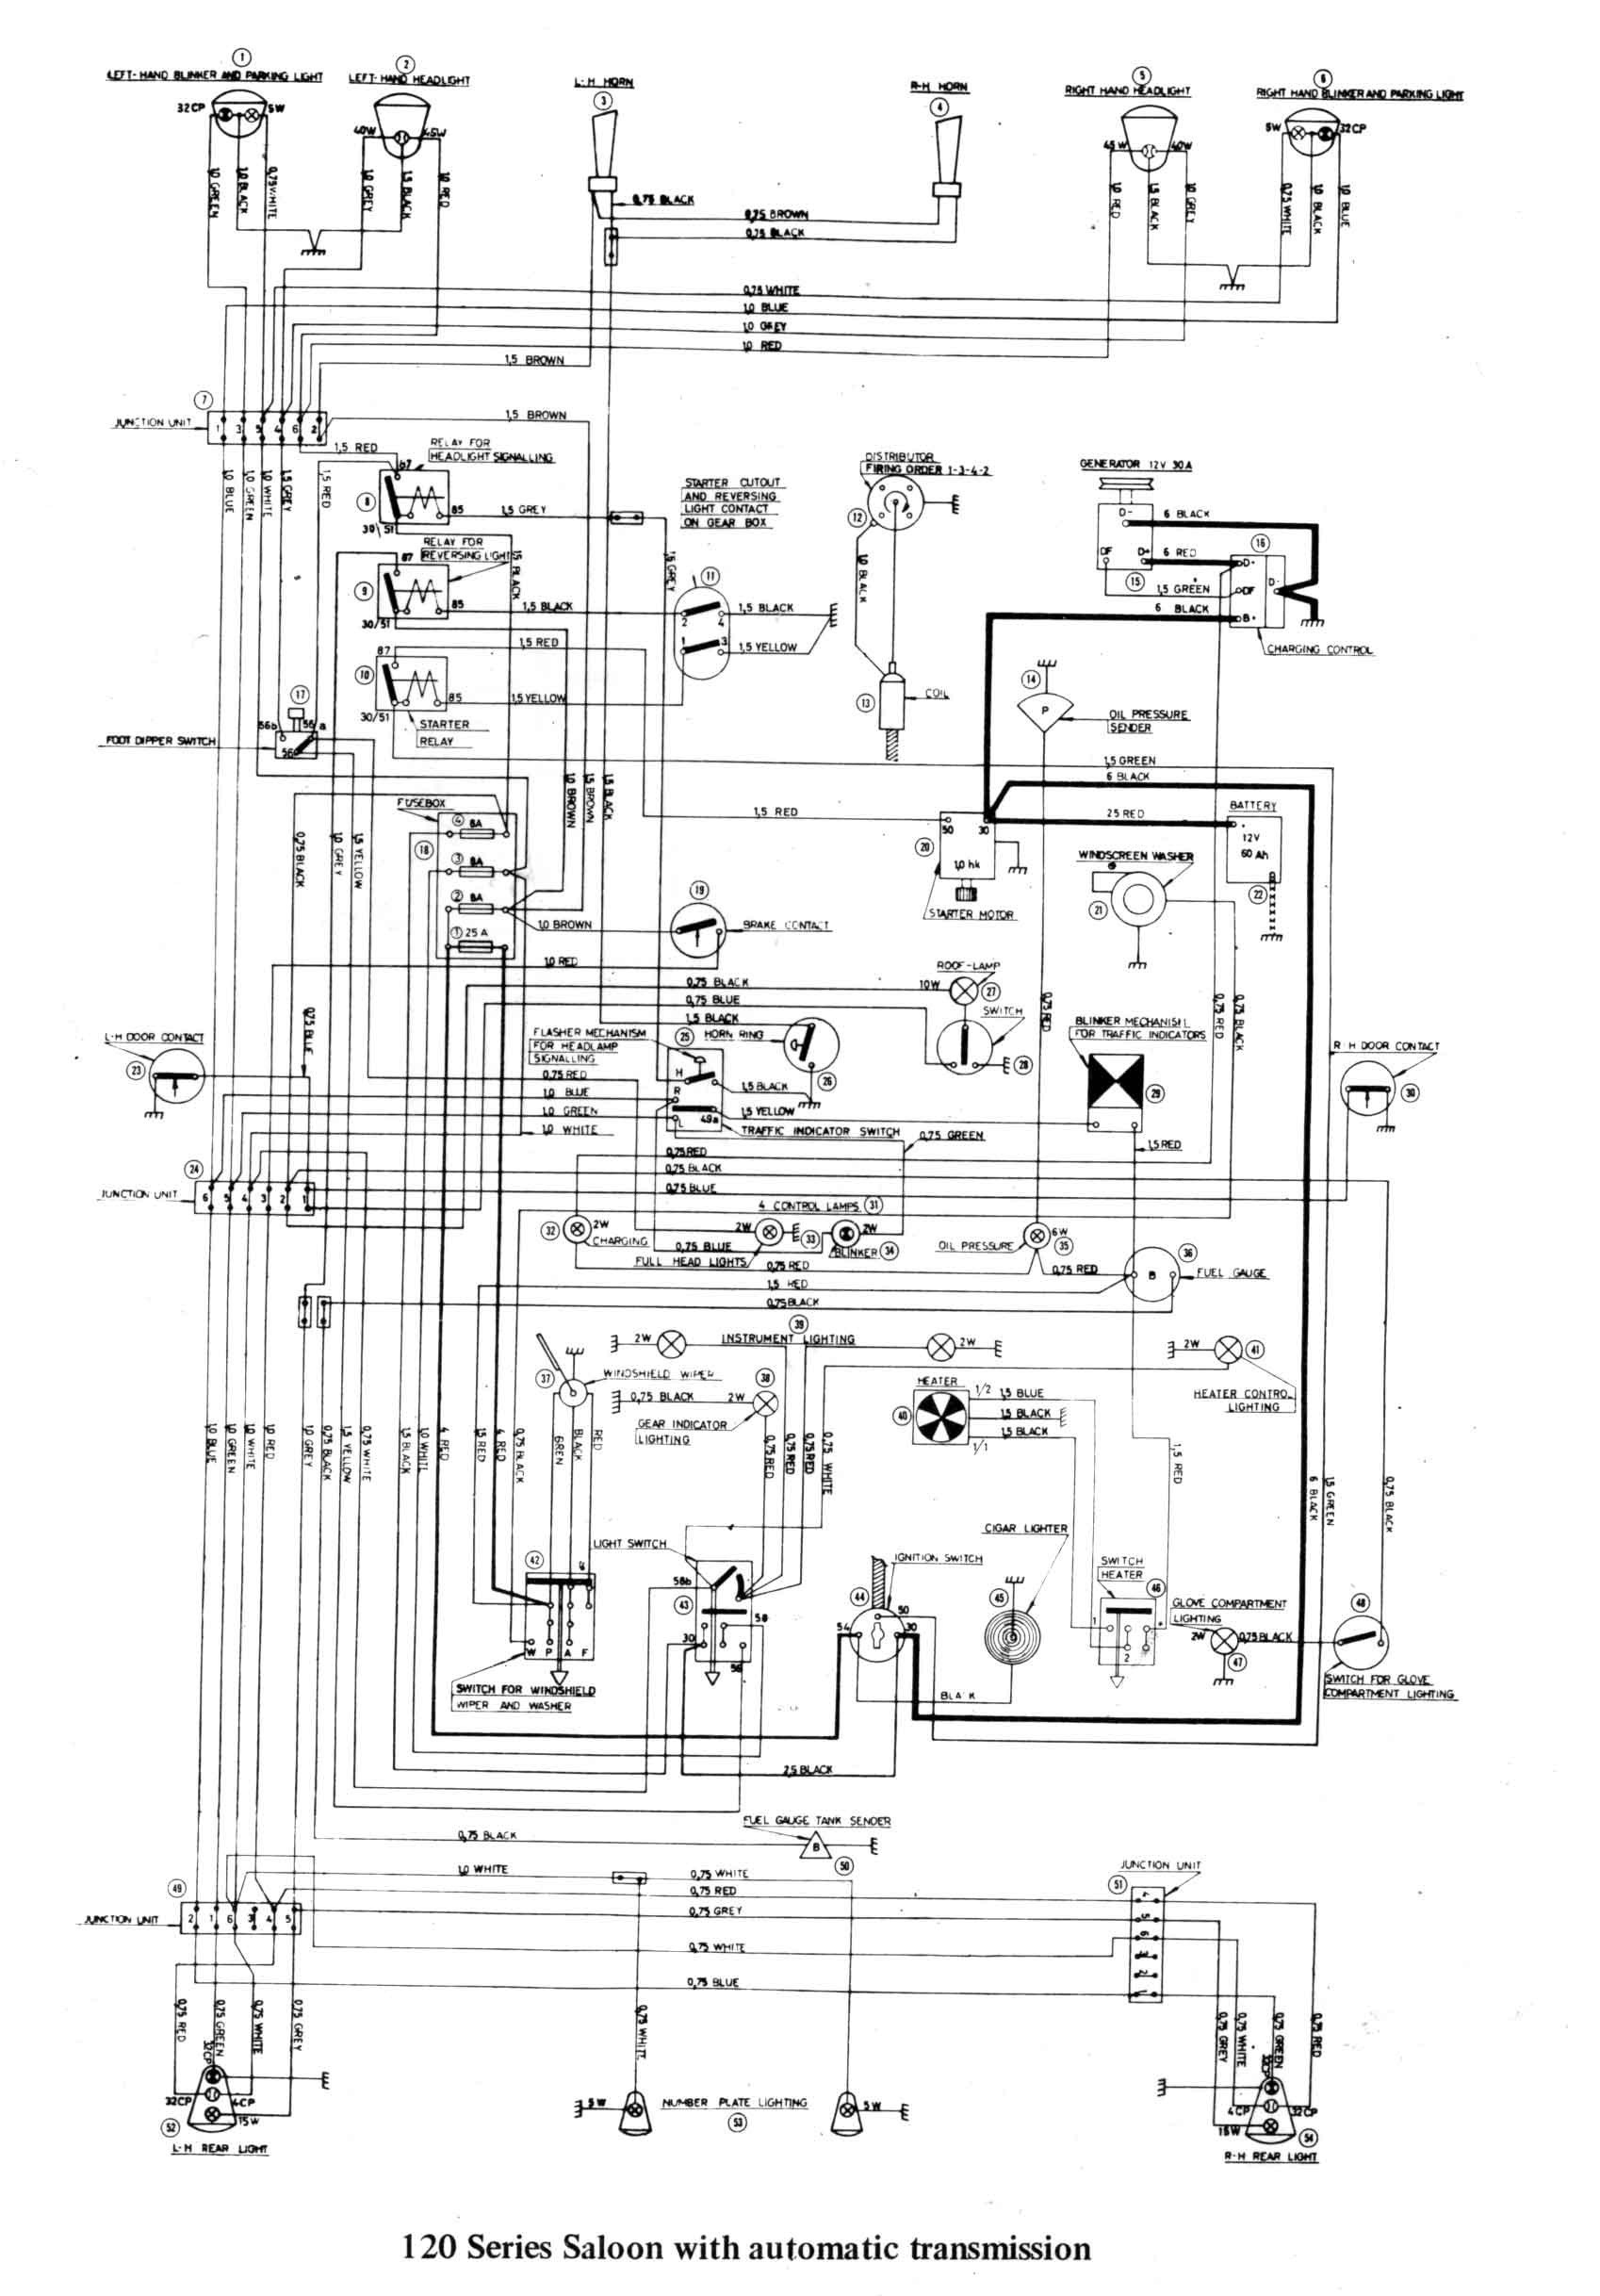 Wiring Diagram for Alternating Relay Best Electrical Wire Diagram Extension Cord Wiring Diagram Download